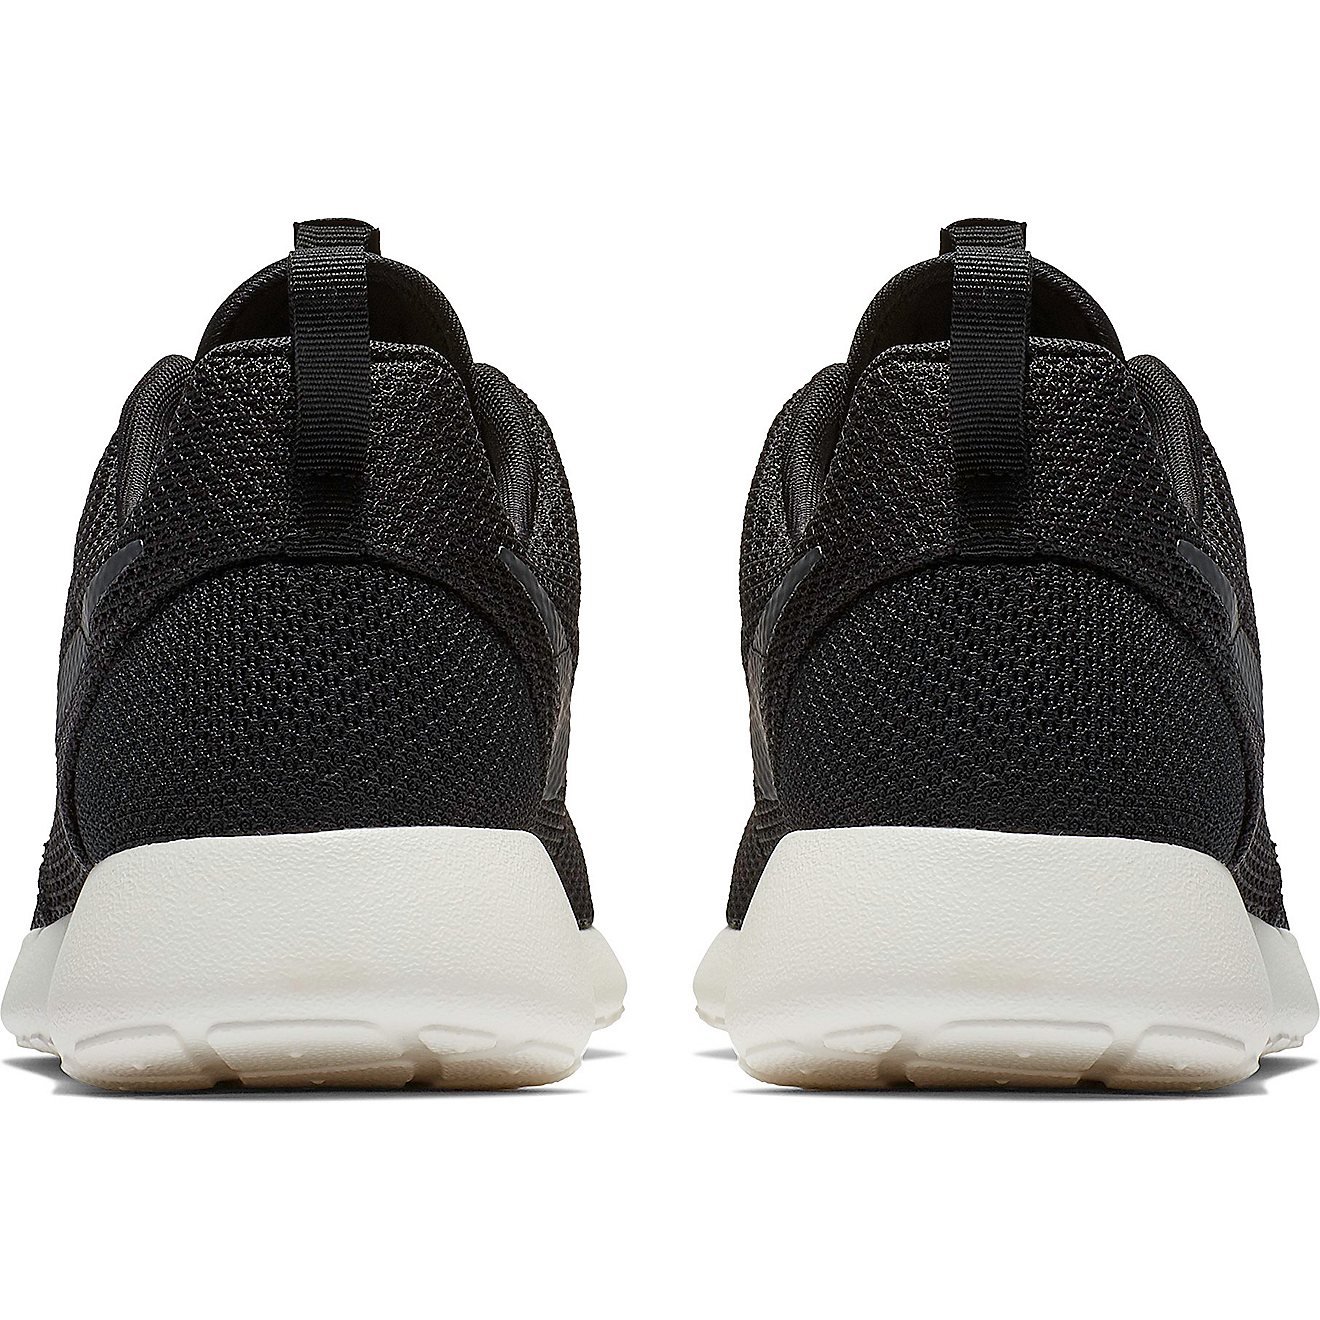 Nike Men's Roshe One Shoes                                                                                                       - view number 6